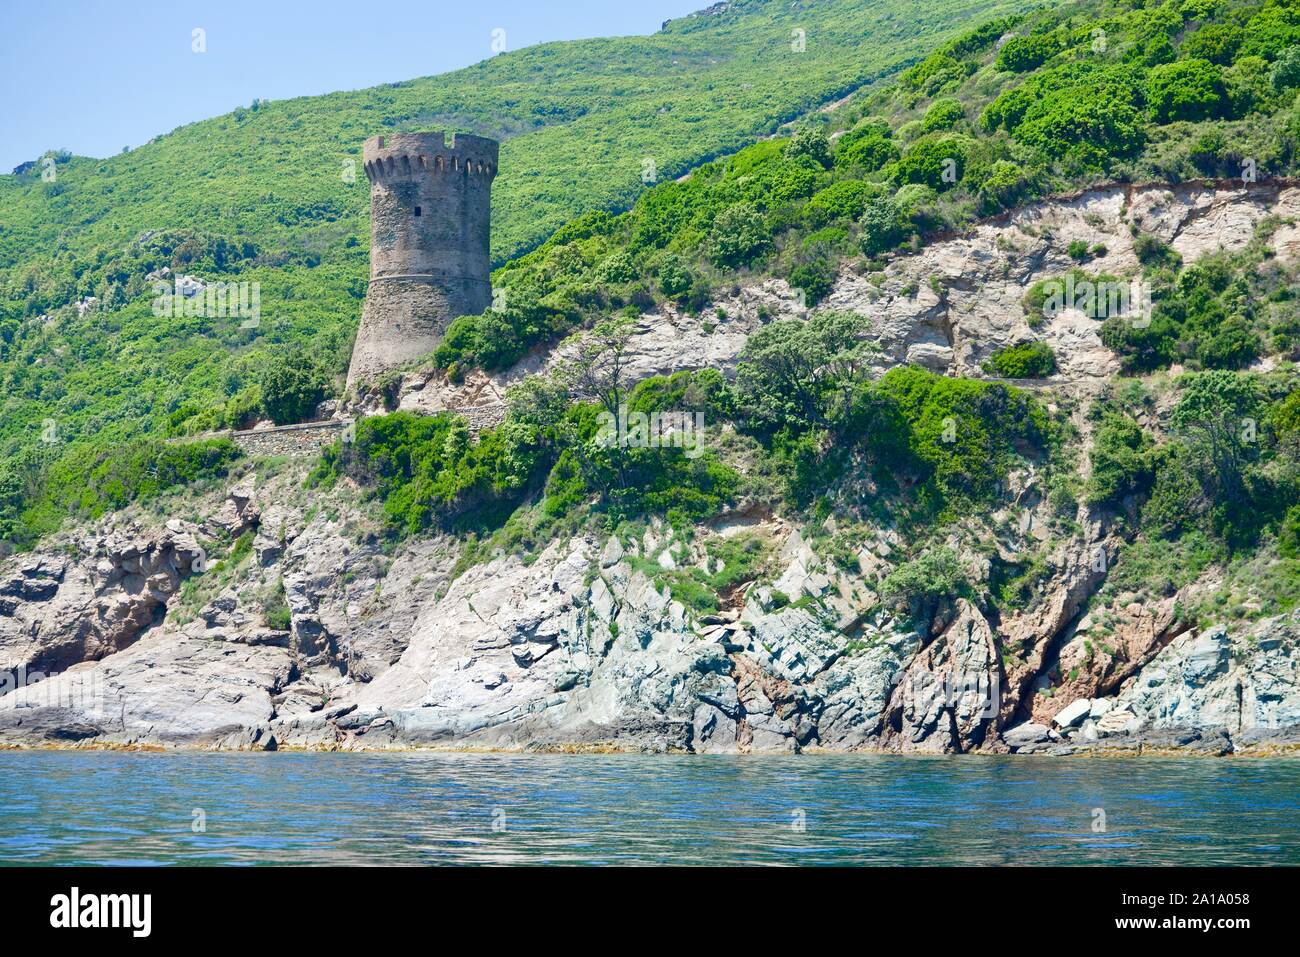 Old Genoese tower on a greened cliff at the turquoise sea Stock Photo